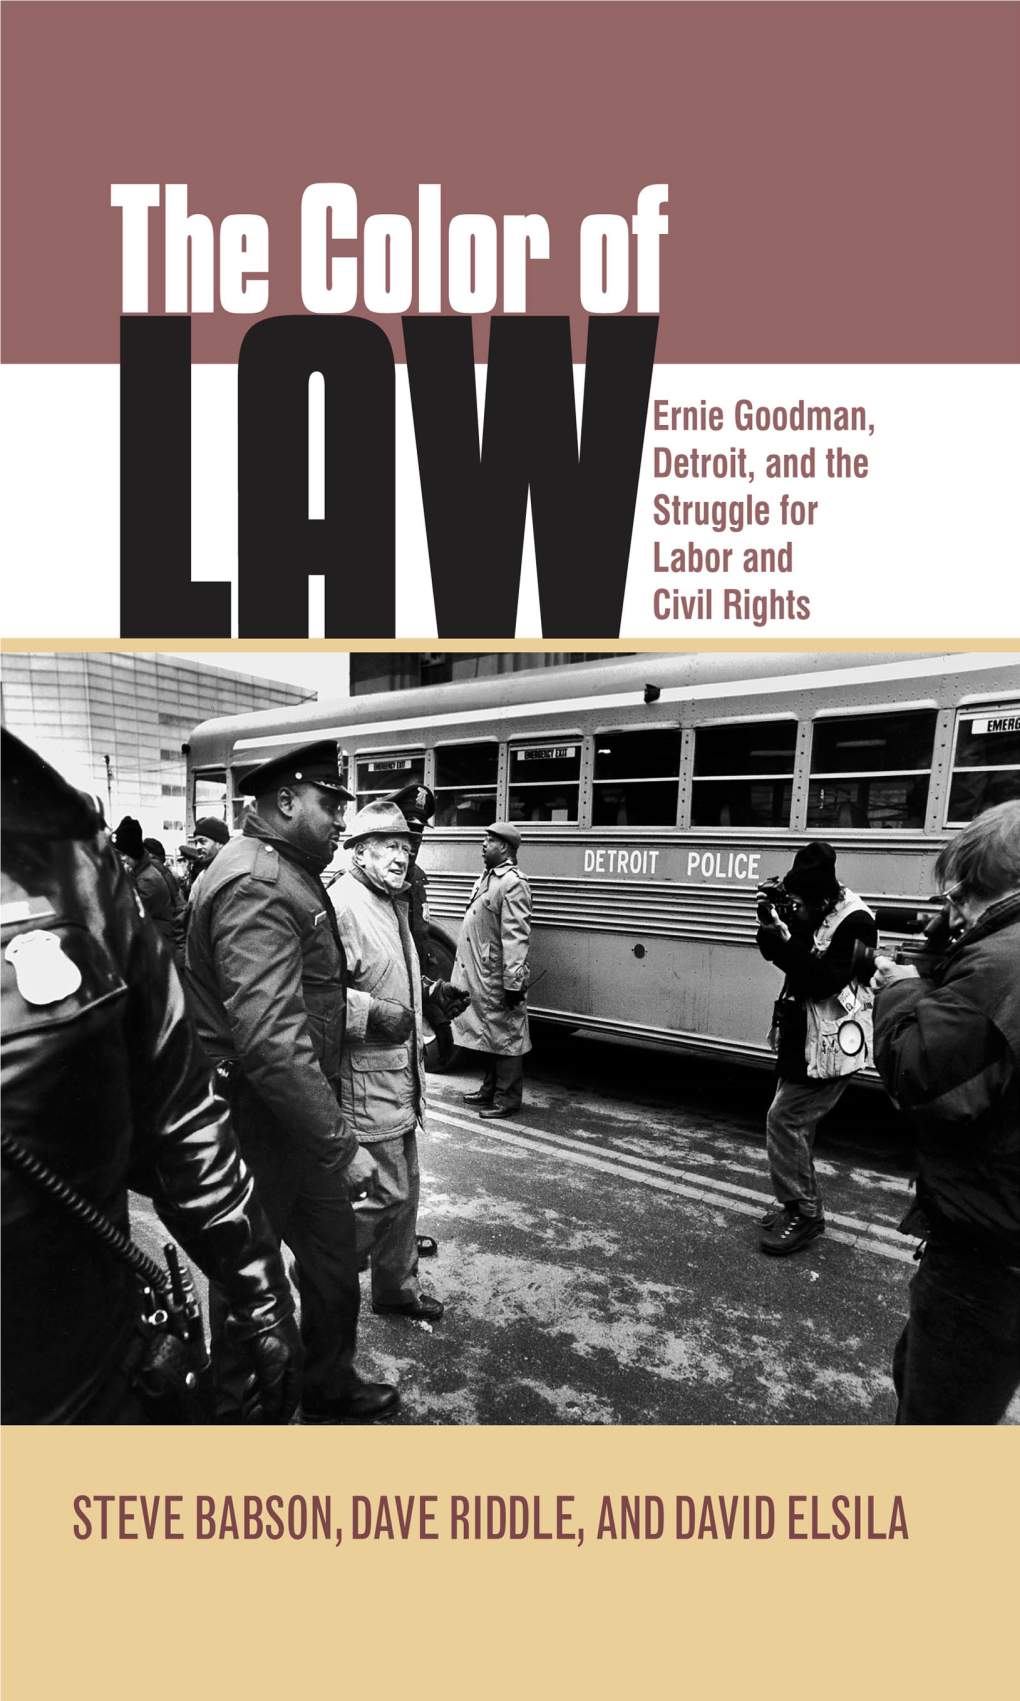 Ernie Goodman, Detroit, and the Struggle for Labor and Civil Rights / Steve Babson, Dave Riddle, and David Elsila